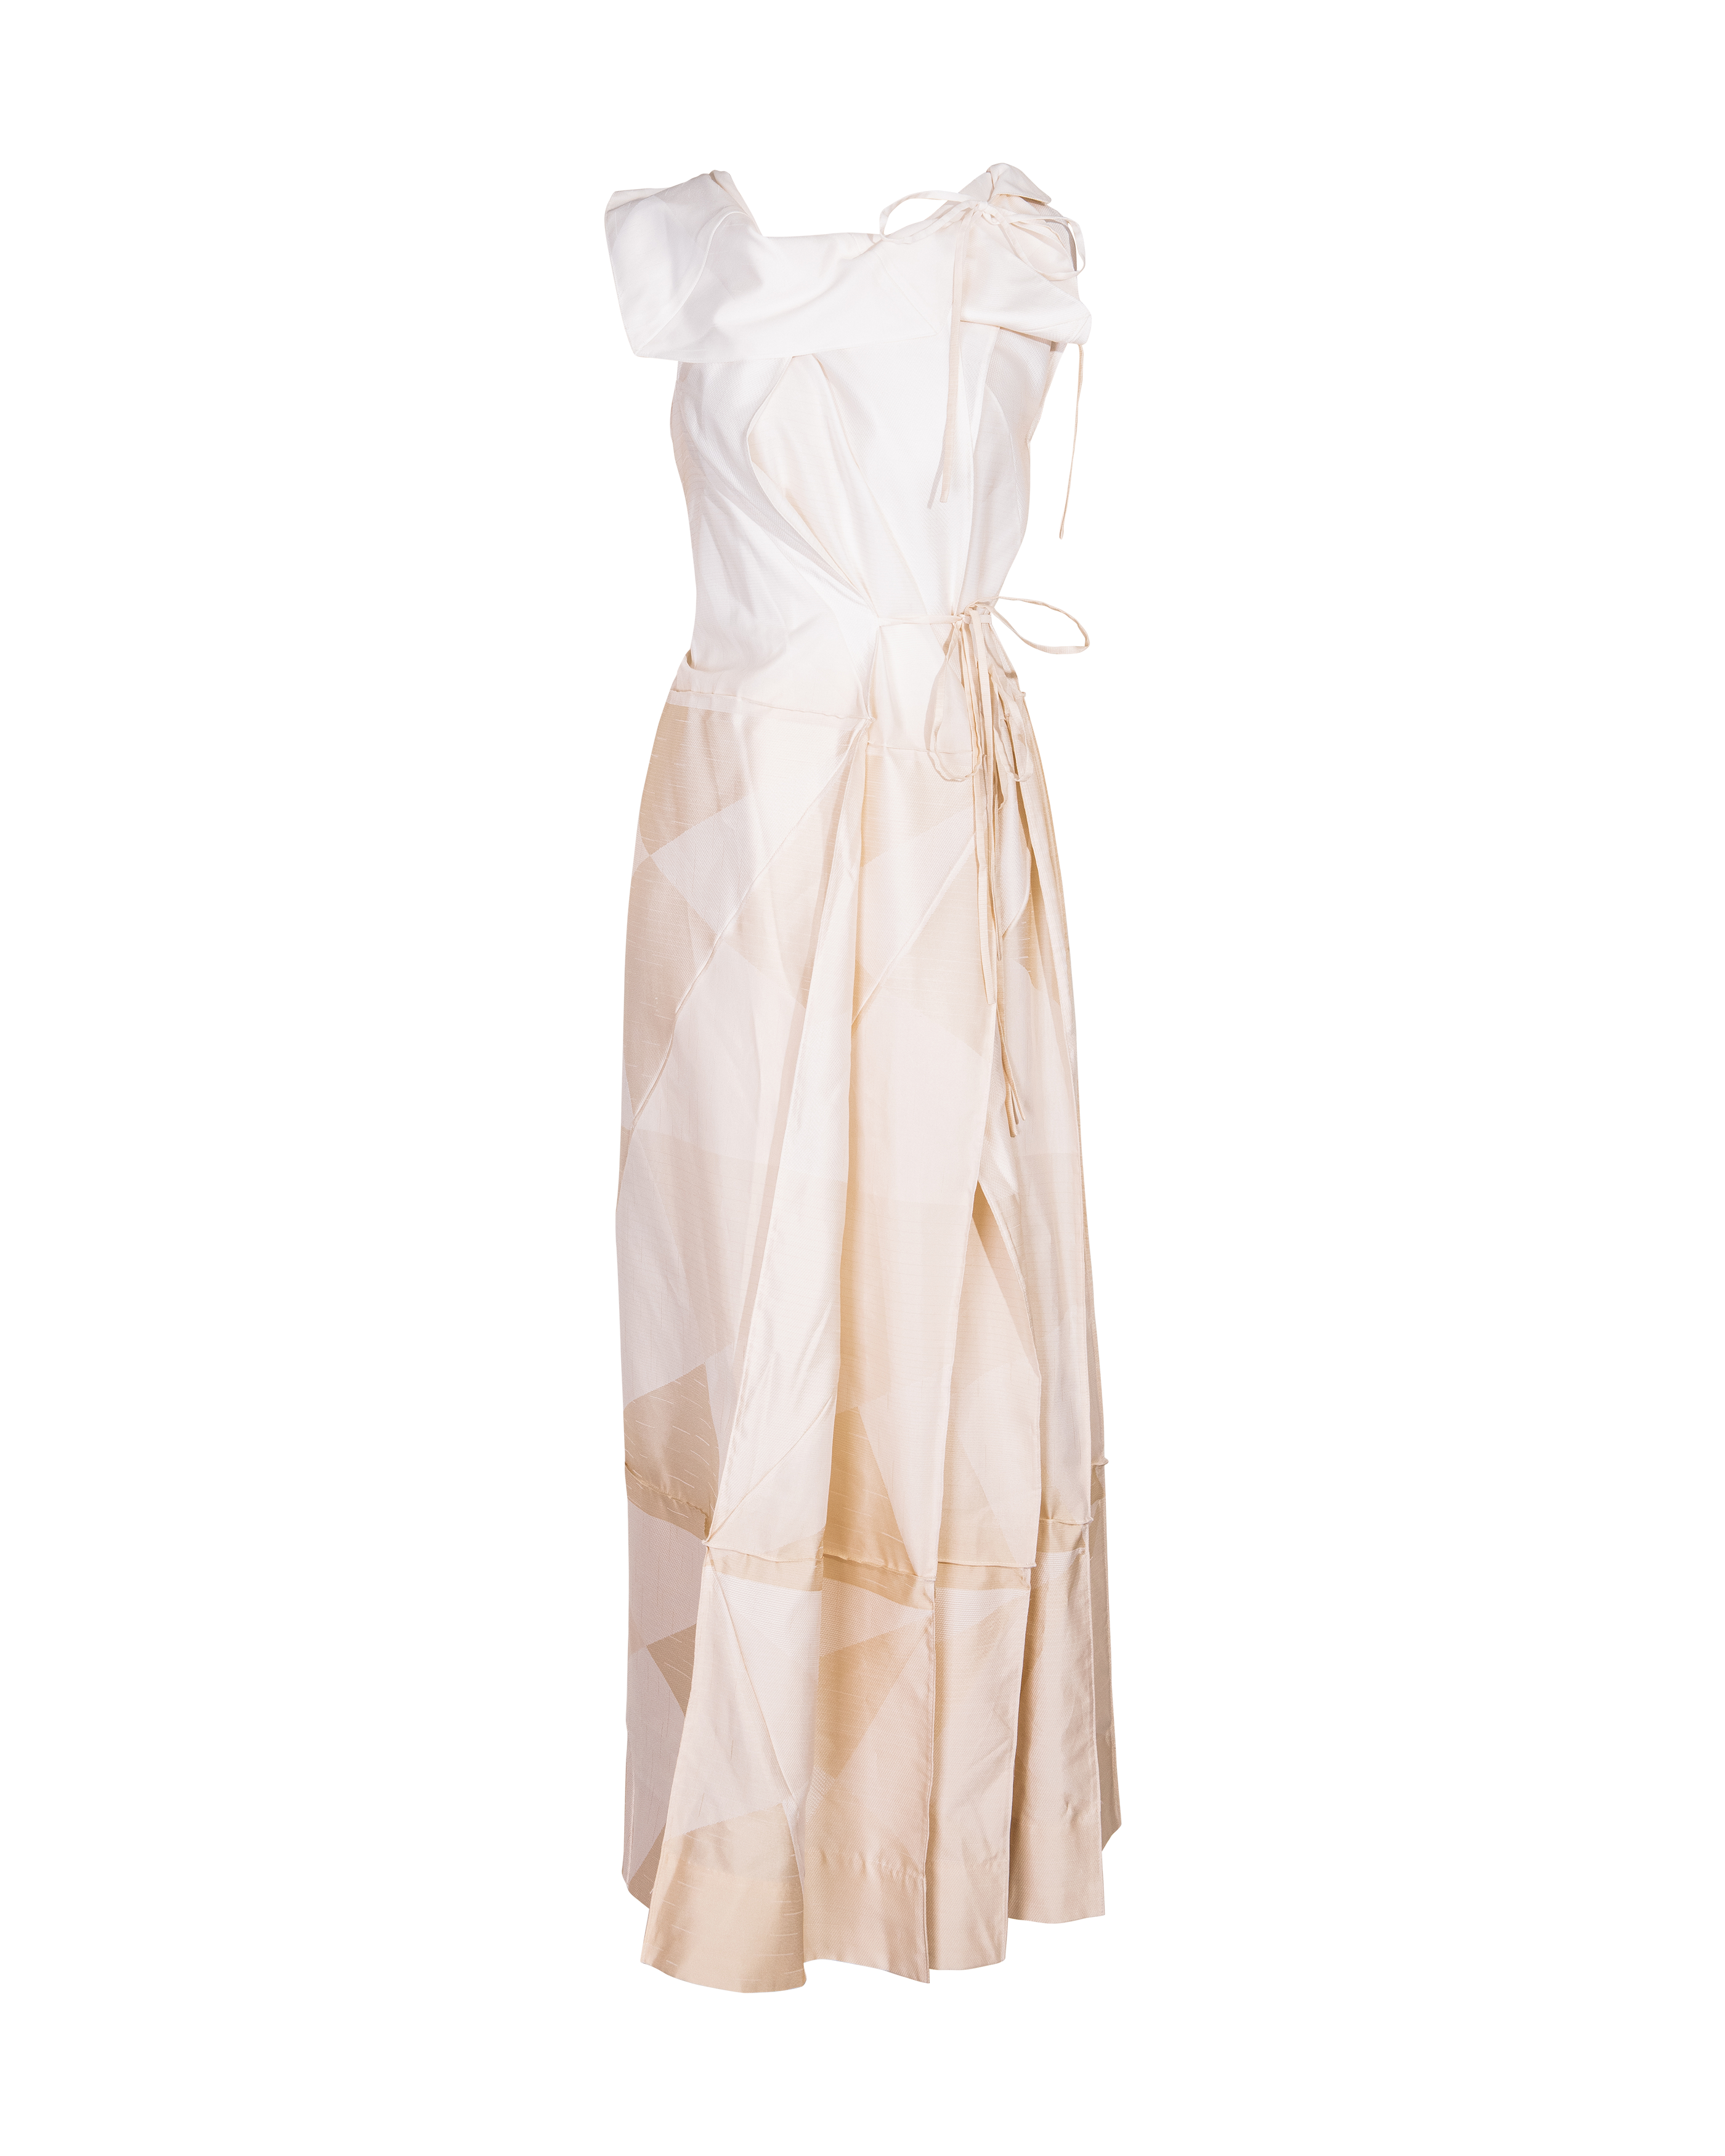 A/W 2008 White and Cream Geometric Sleeveless Gown